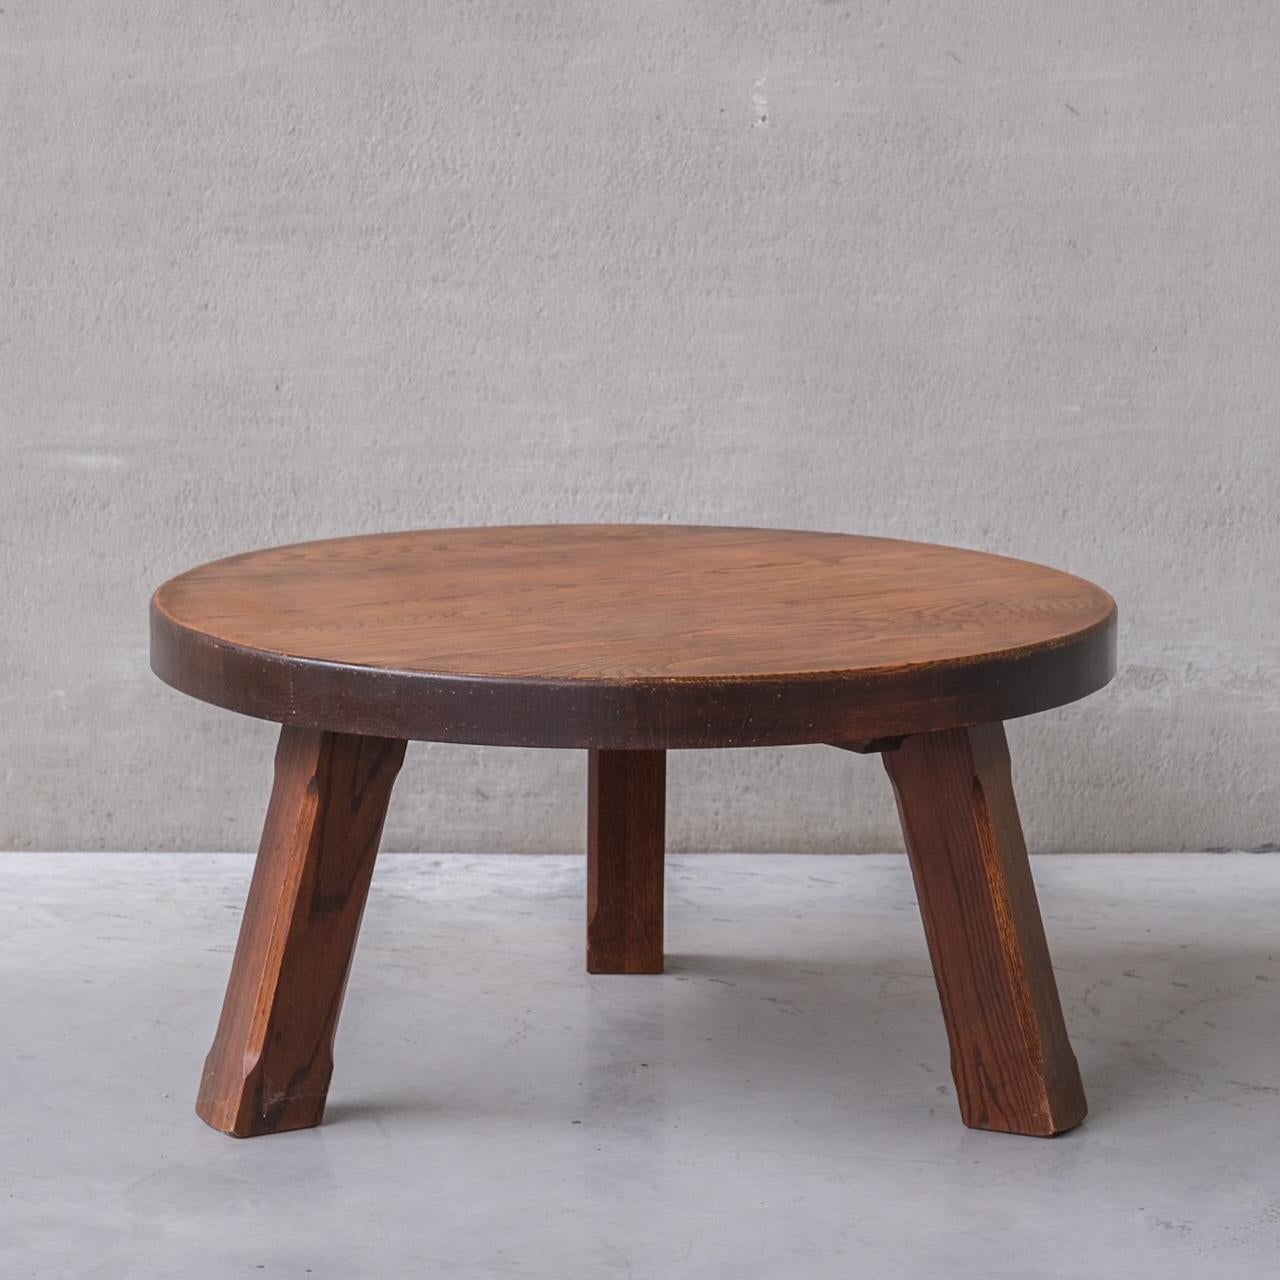 An oak circular coffee table, 

Belgium, circa 1970s. 

Raised over tripod legs. 

Good vintage condition, some scuffs and wear commensurate with age. 

INTERNAL REF: 284/CT0010 

Location: Belgium Gallery. 

Dimensions: 100 Diameter x